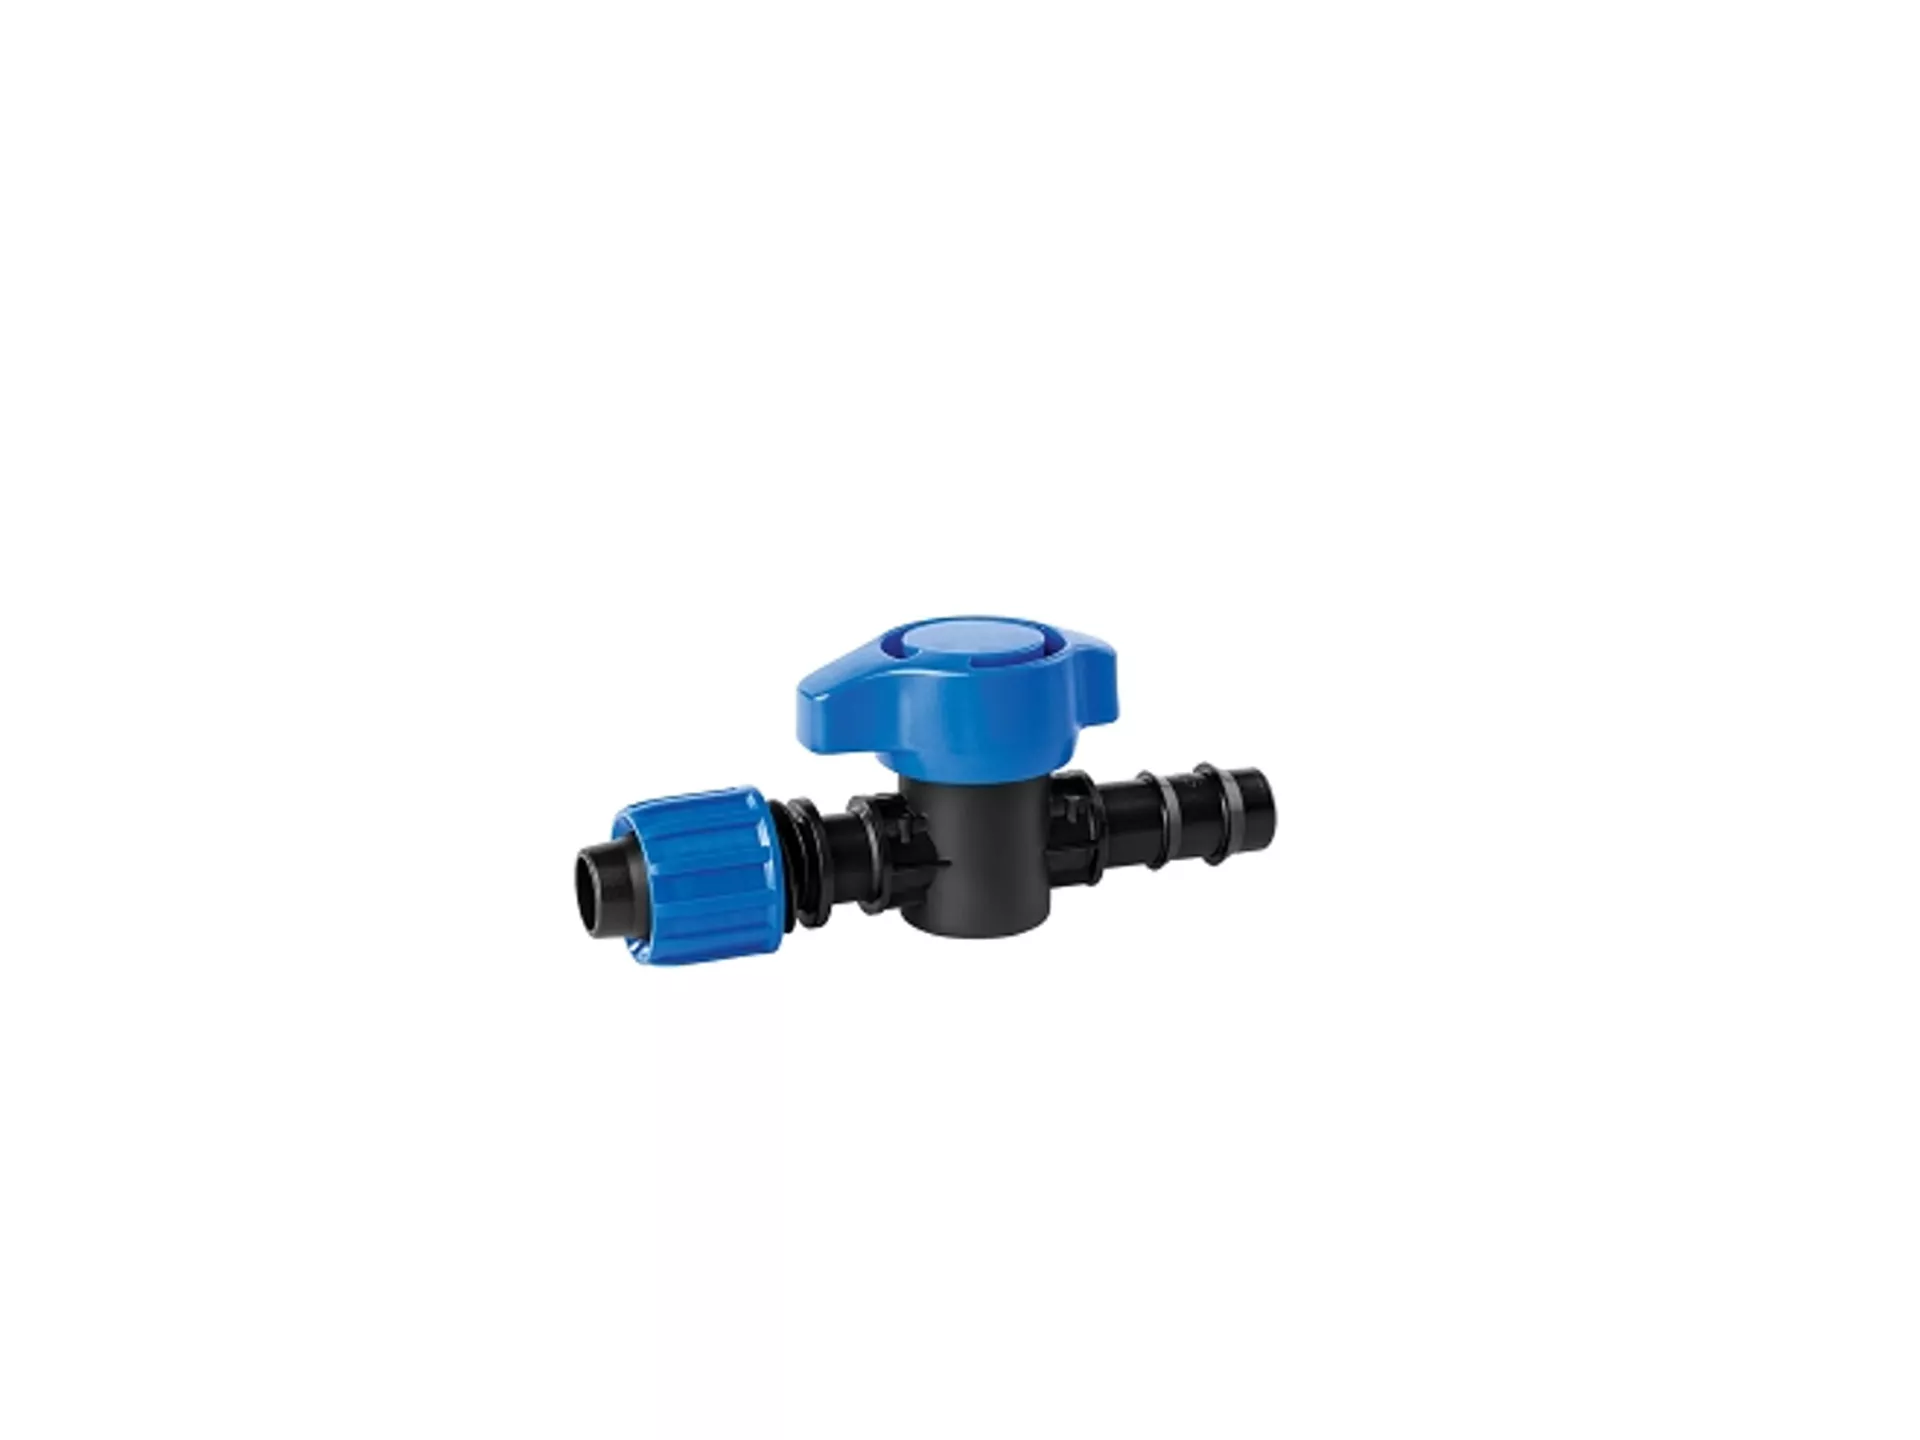 Barbed Mini Valve With Nut